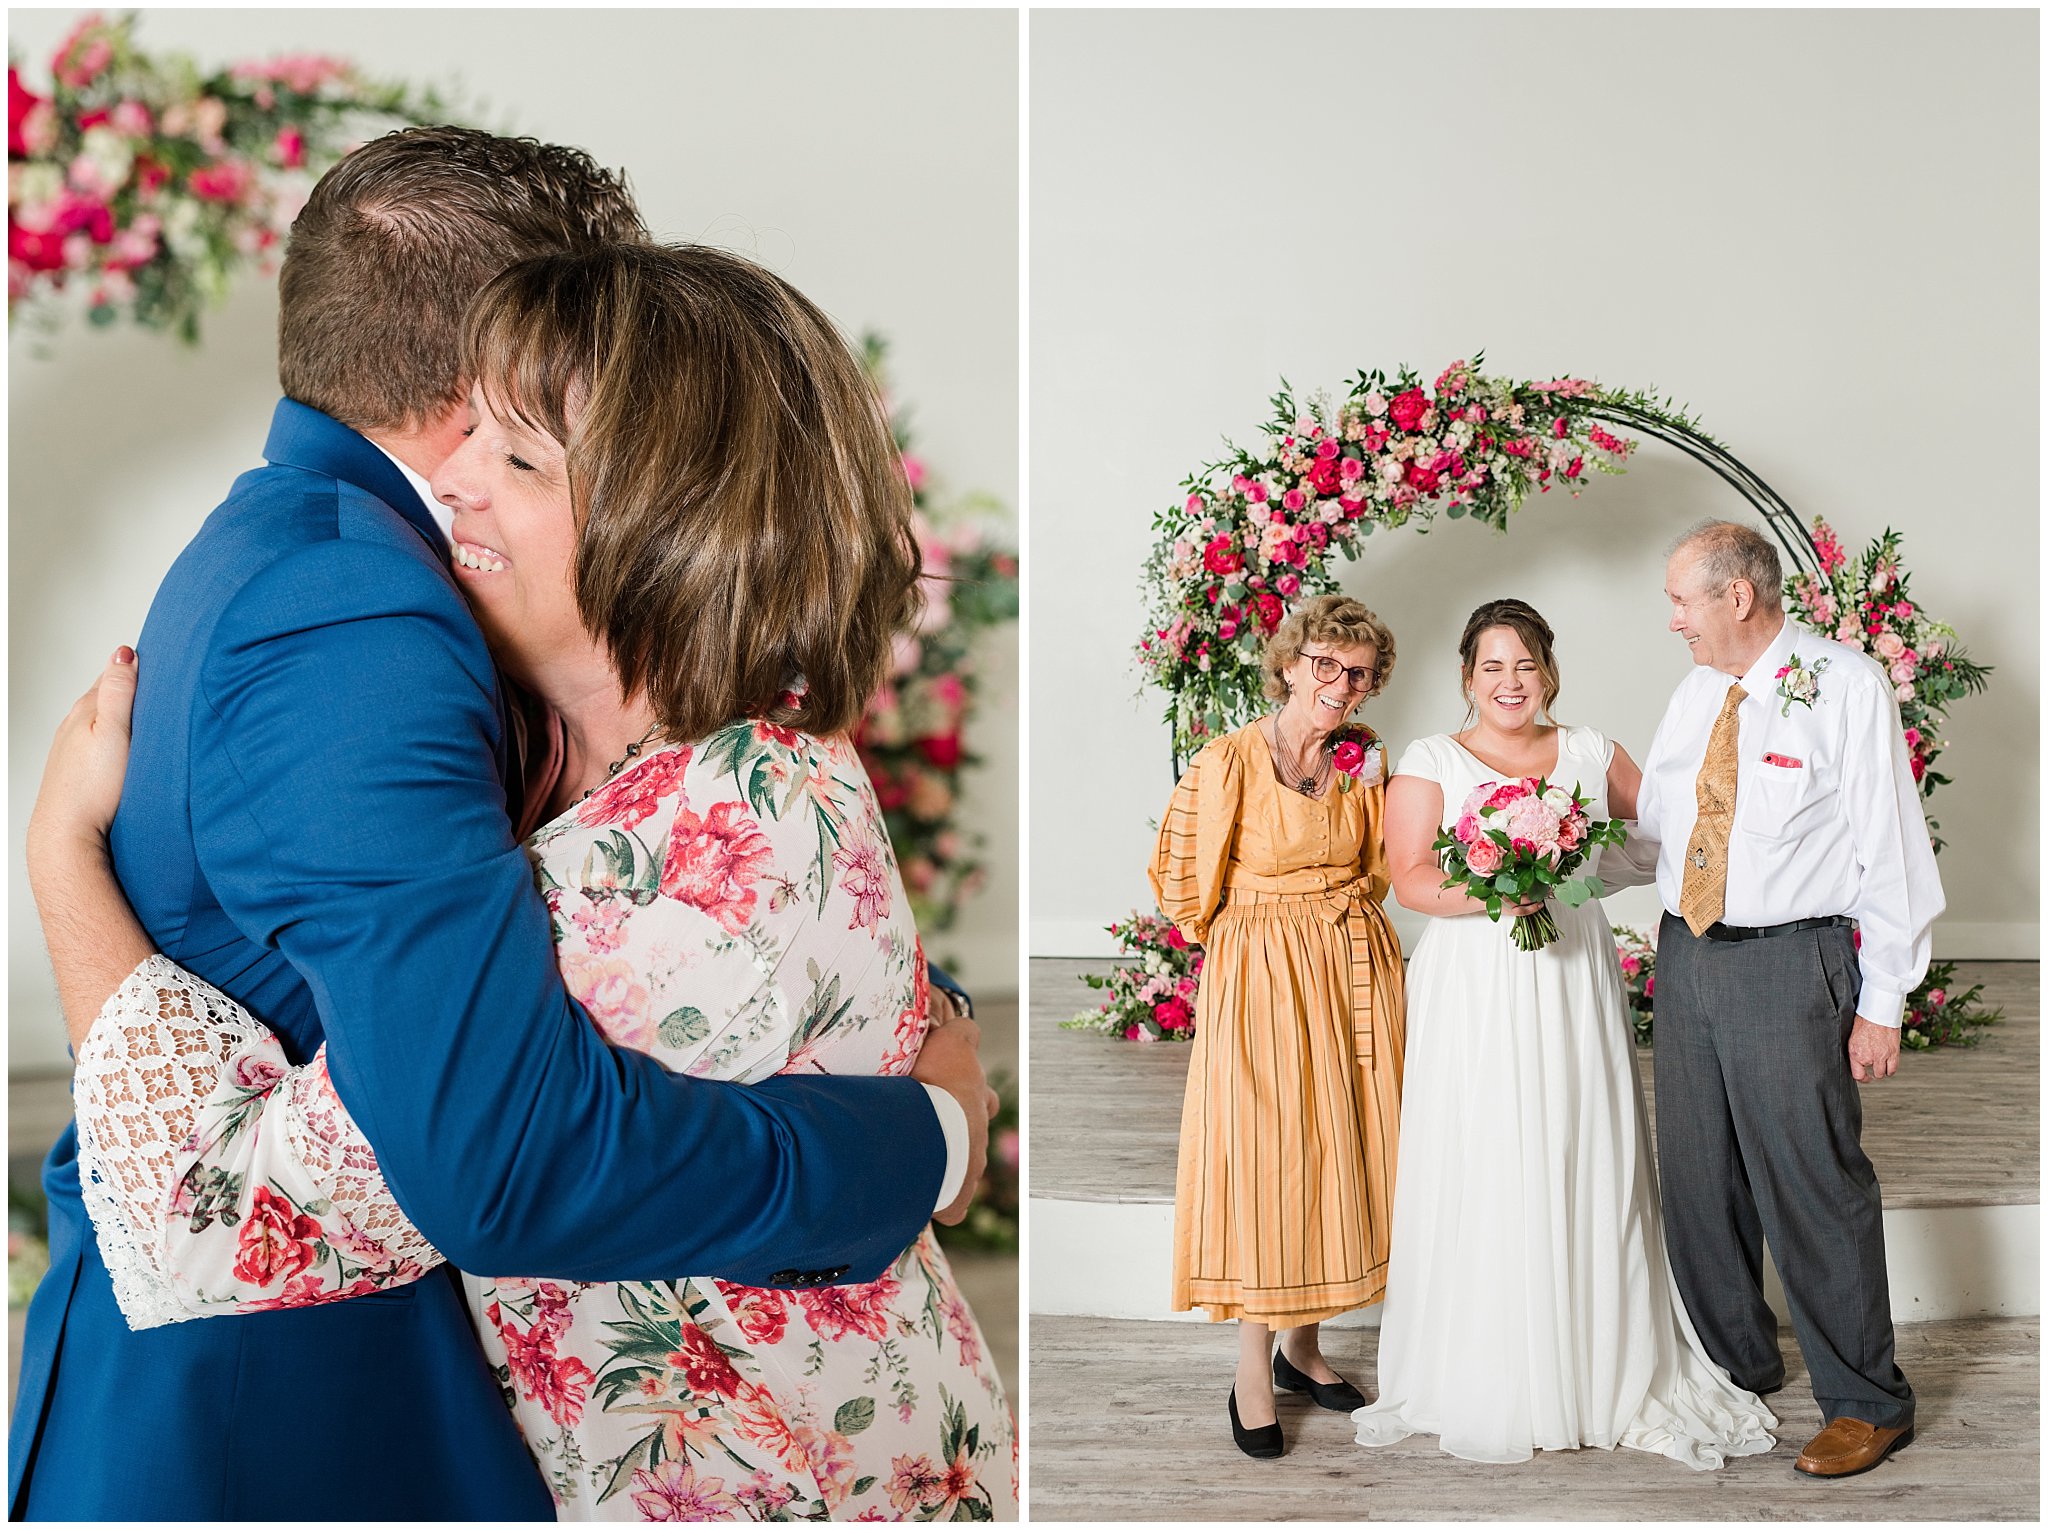 Family portraits in front of floral arch in shades of pink | Talia Event Center Summer Wedding | Jessie and Dallin Photography